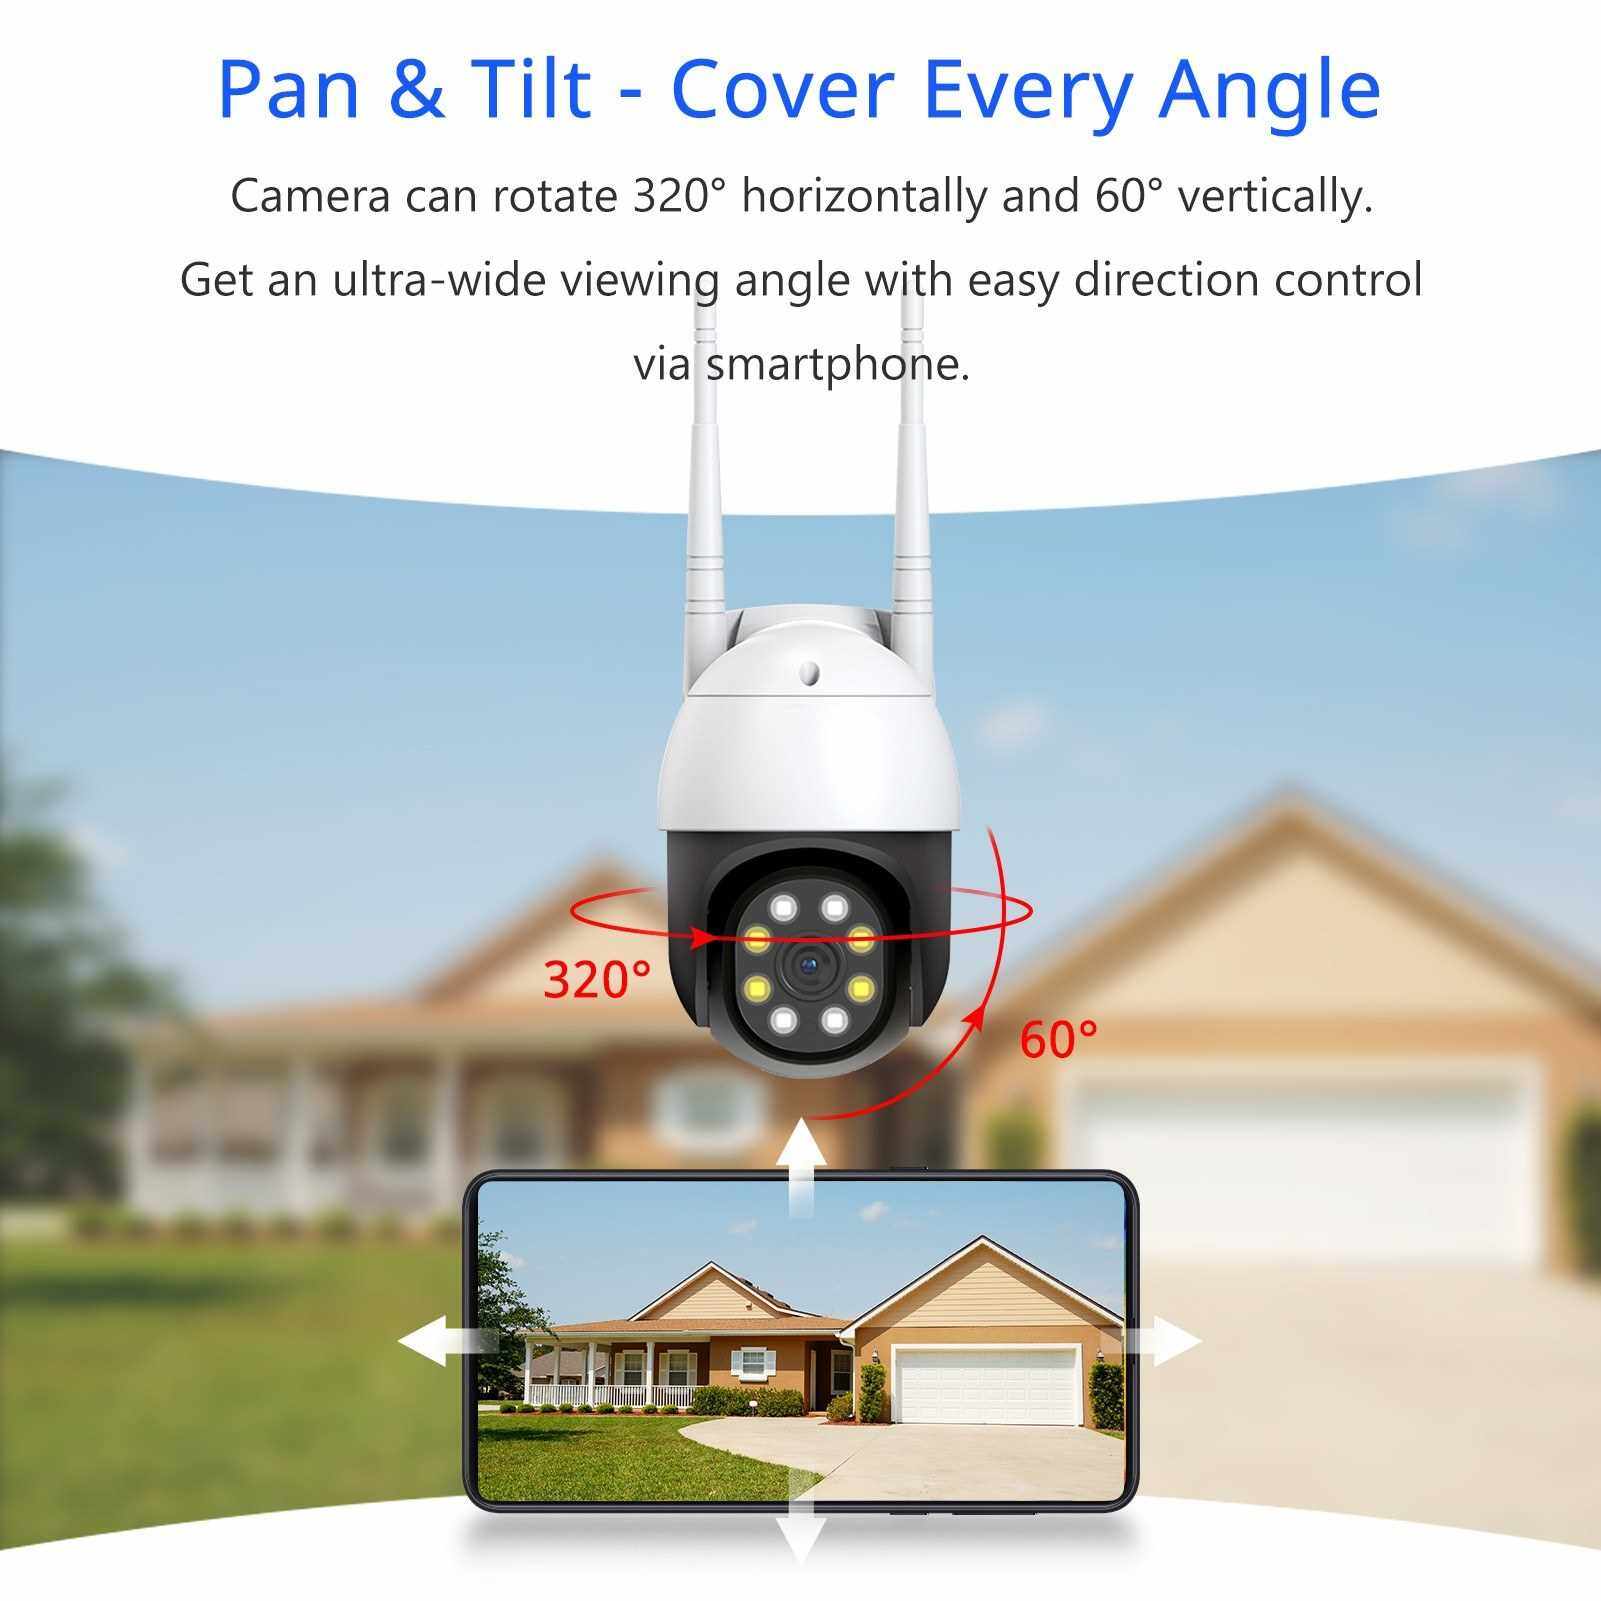 Outdoor Security Camera, 720P Pan Tilt Wireless WiFi Outdoor Cameras for Home Security System with 360 View, Night Vision, Two-Way Audio, Motion Detection,Ycc365plus App Remote Access, IP66 Waterproof (Black & White)